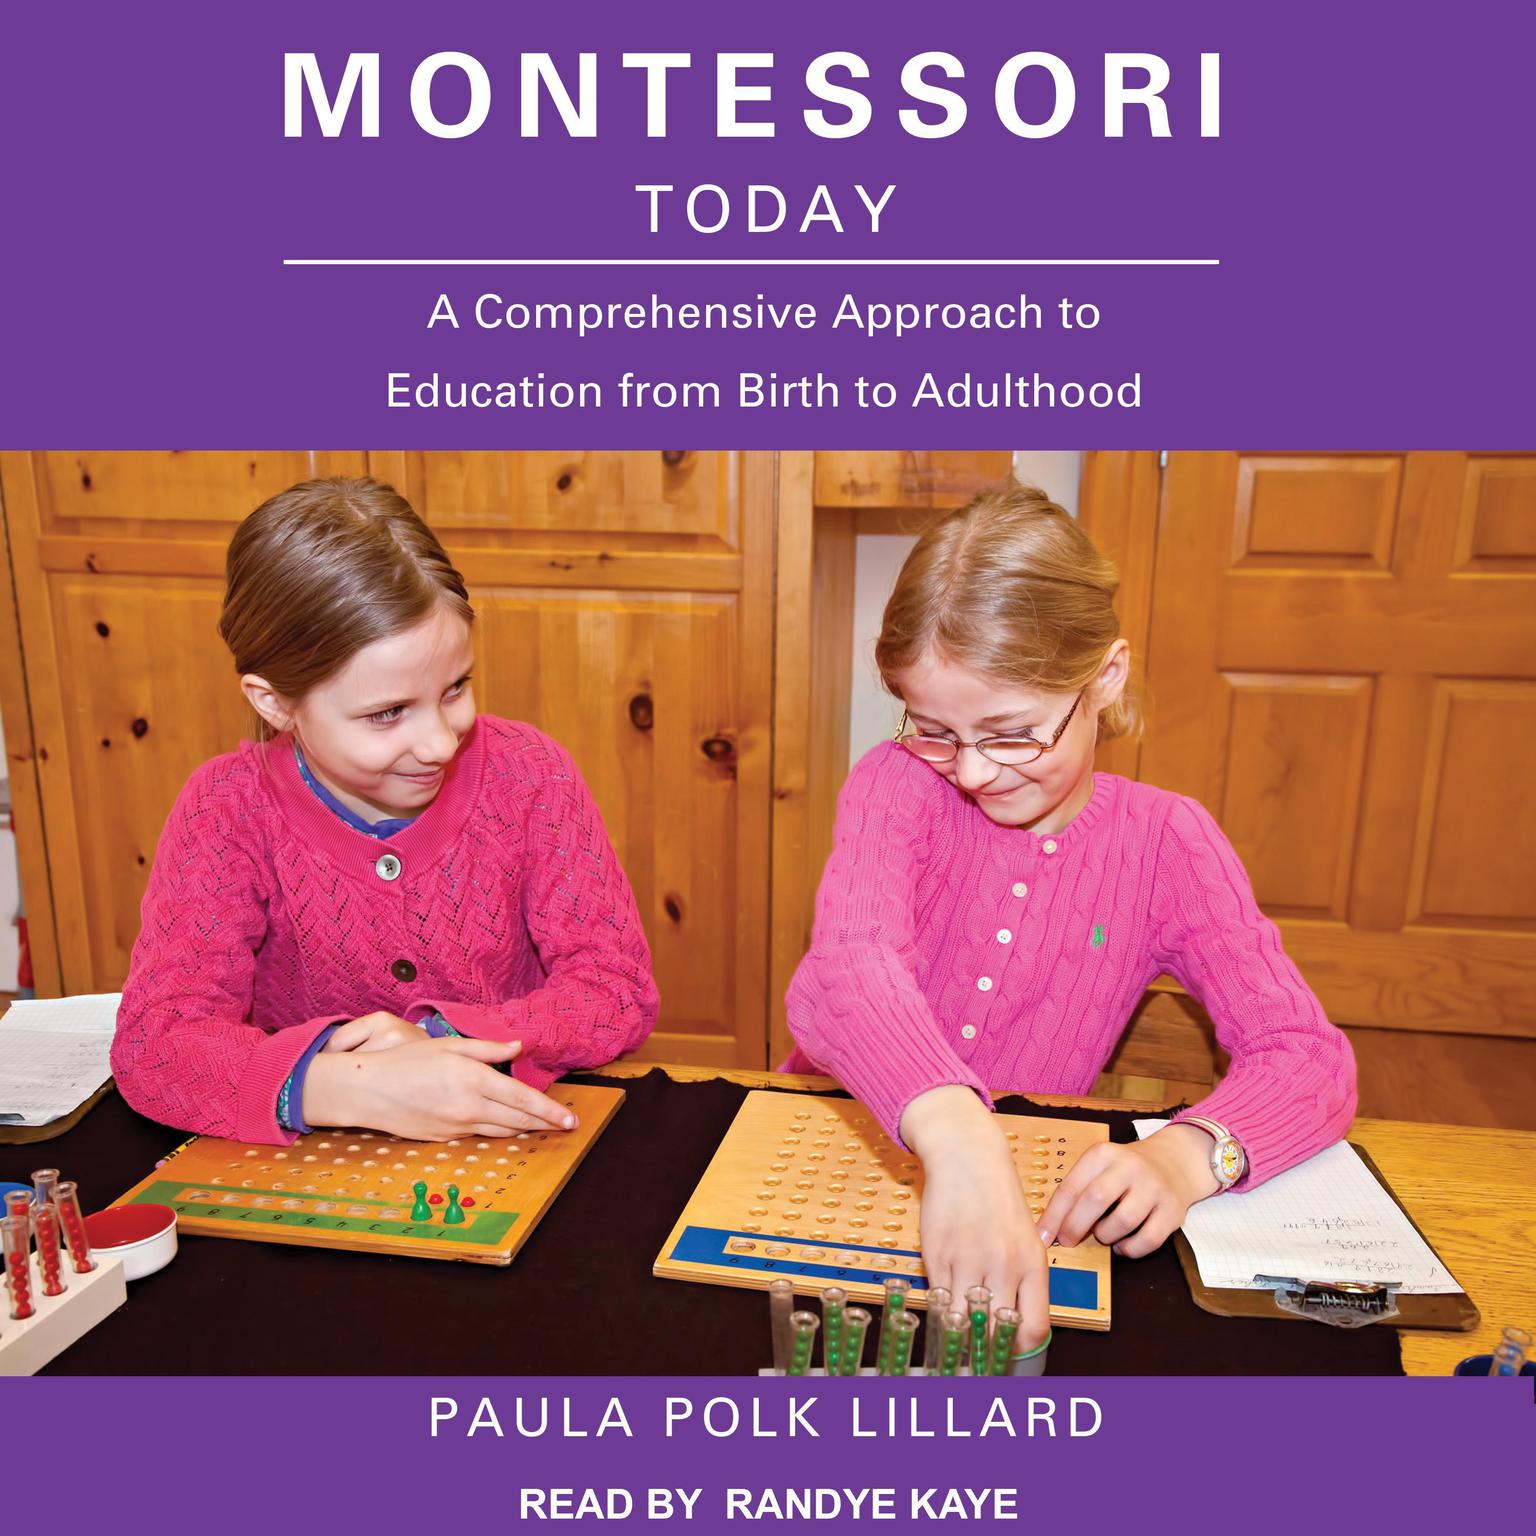 Montessori Today: A Comprehensive Approach to Education from Birth to Adulthood Audiobook, by Paula Polk Lillard